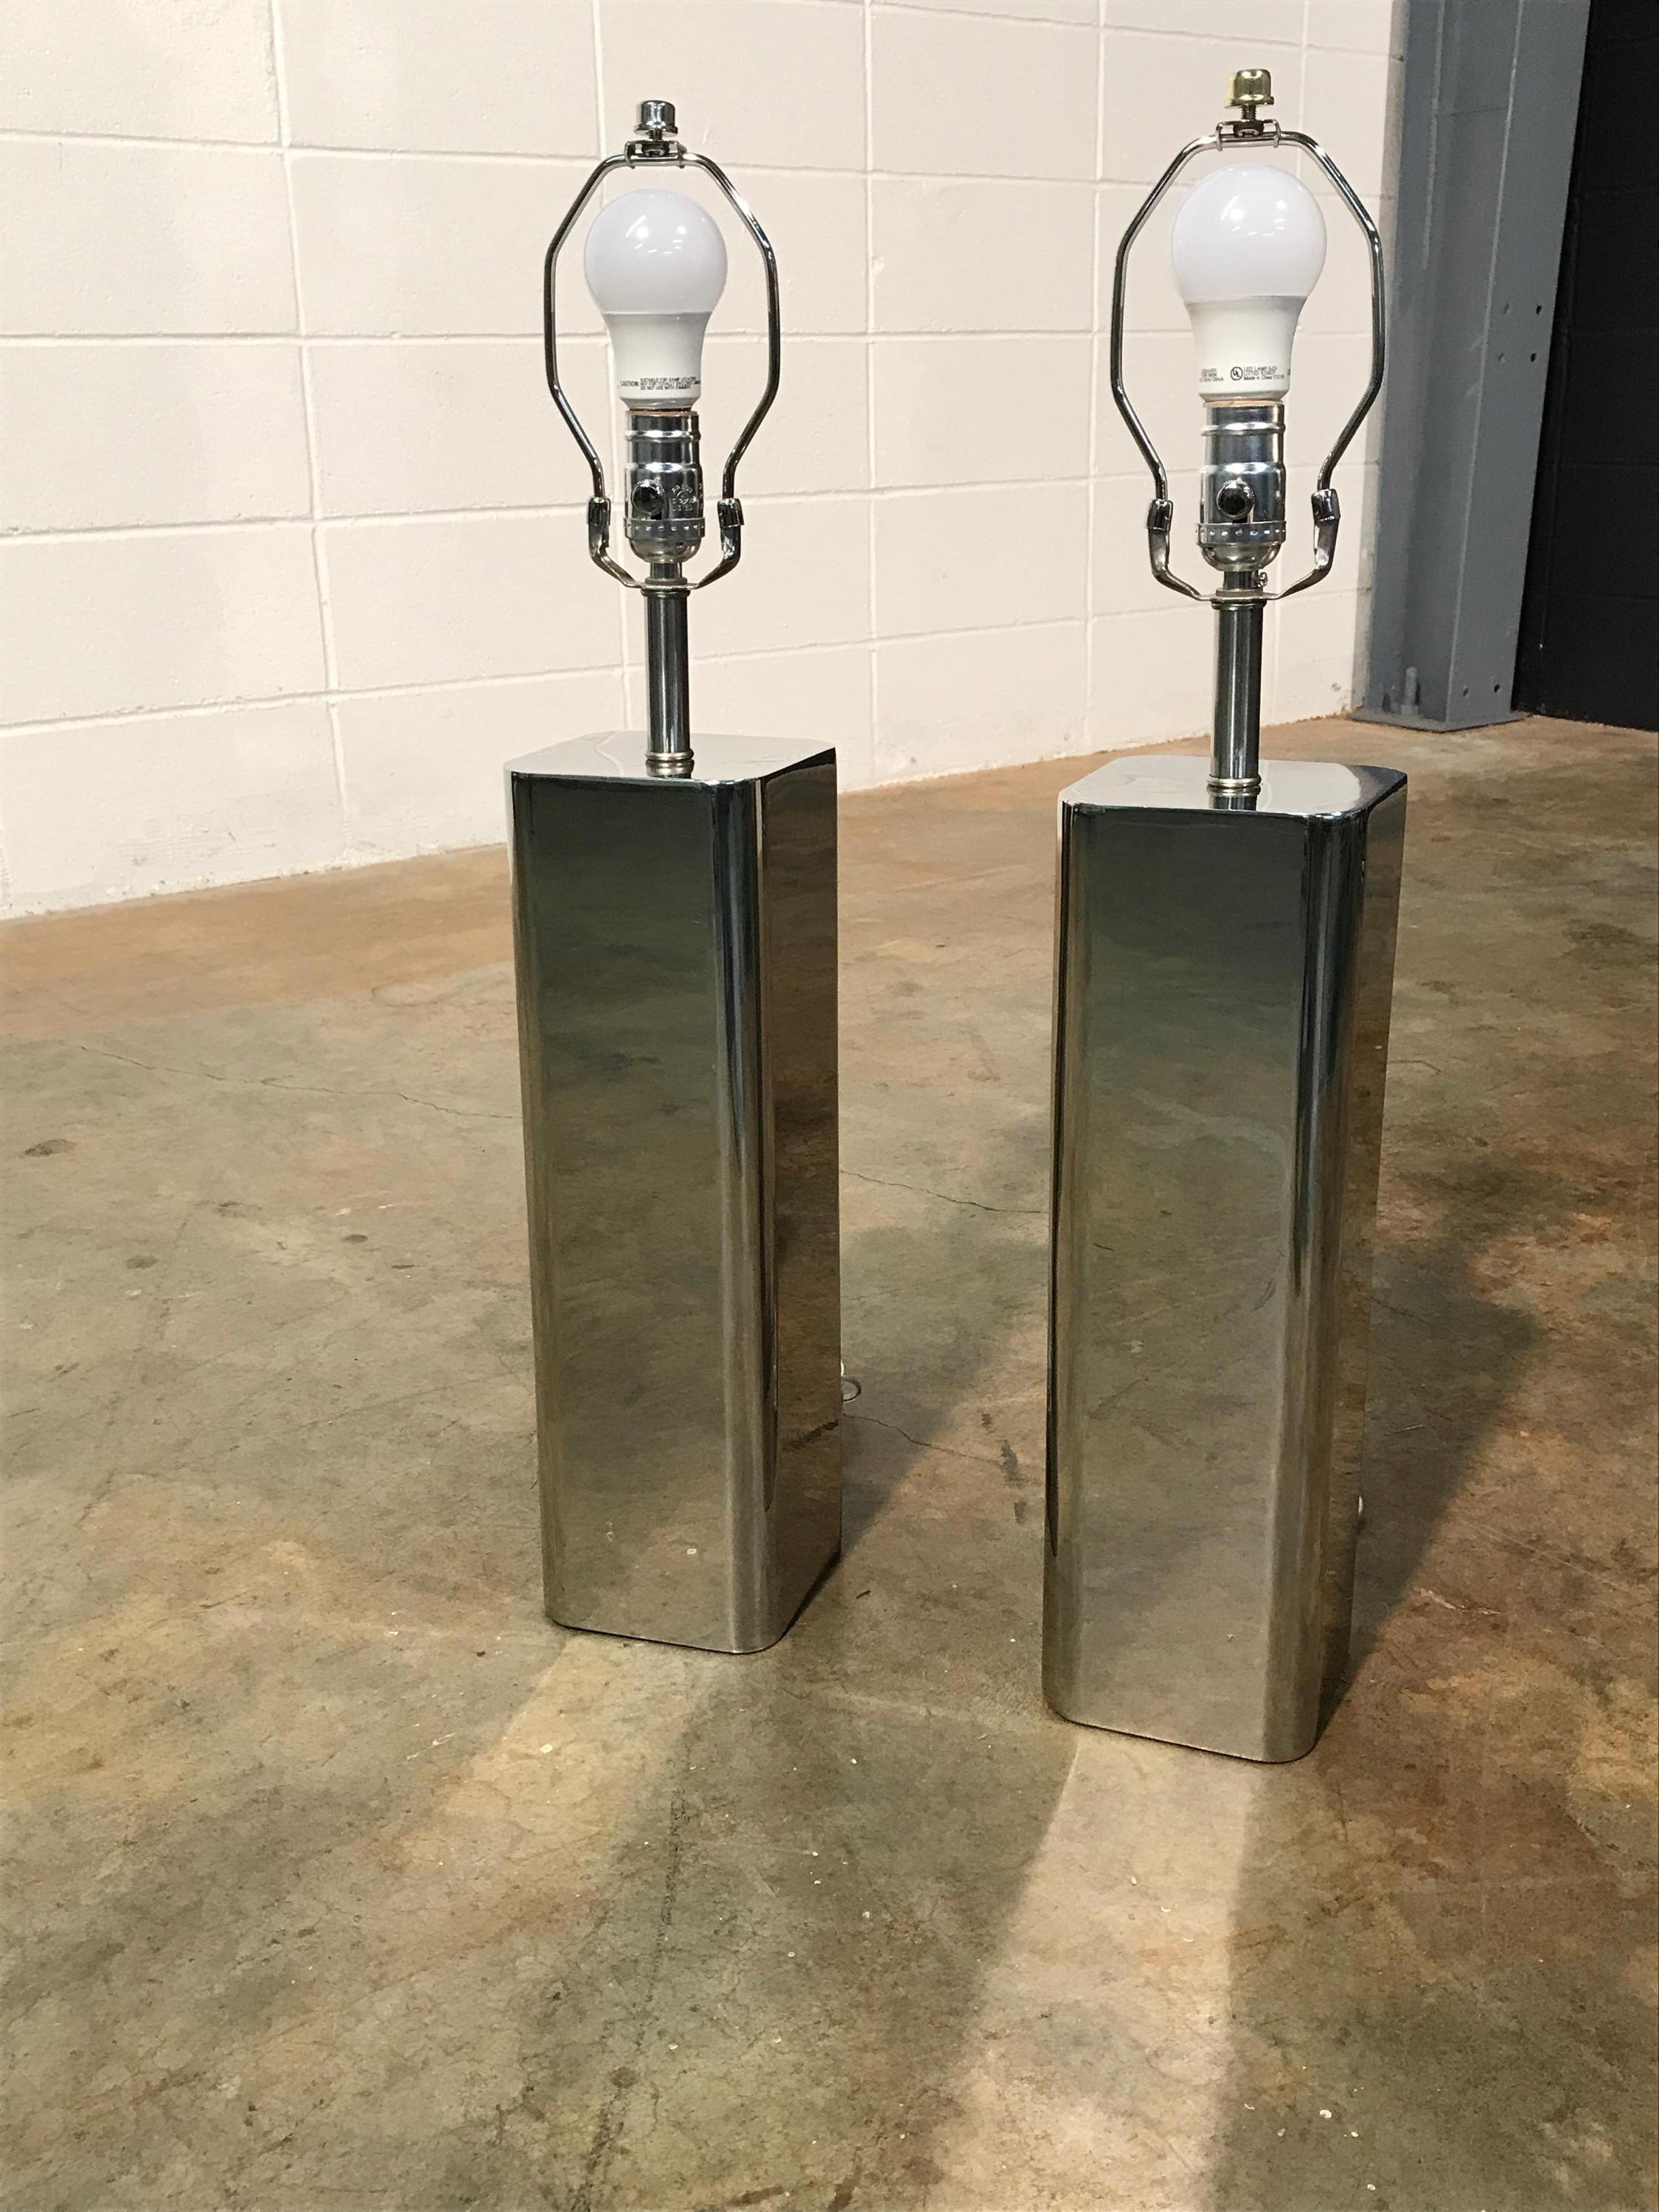 Pair of Vintage Chrome Lamps Attributed to Laurel Lamp Co. In Good Condition For Sale In Marietta, GA